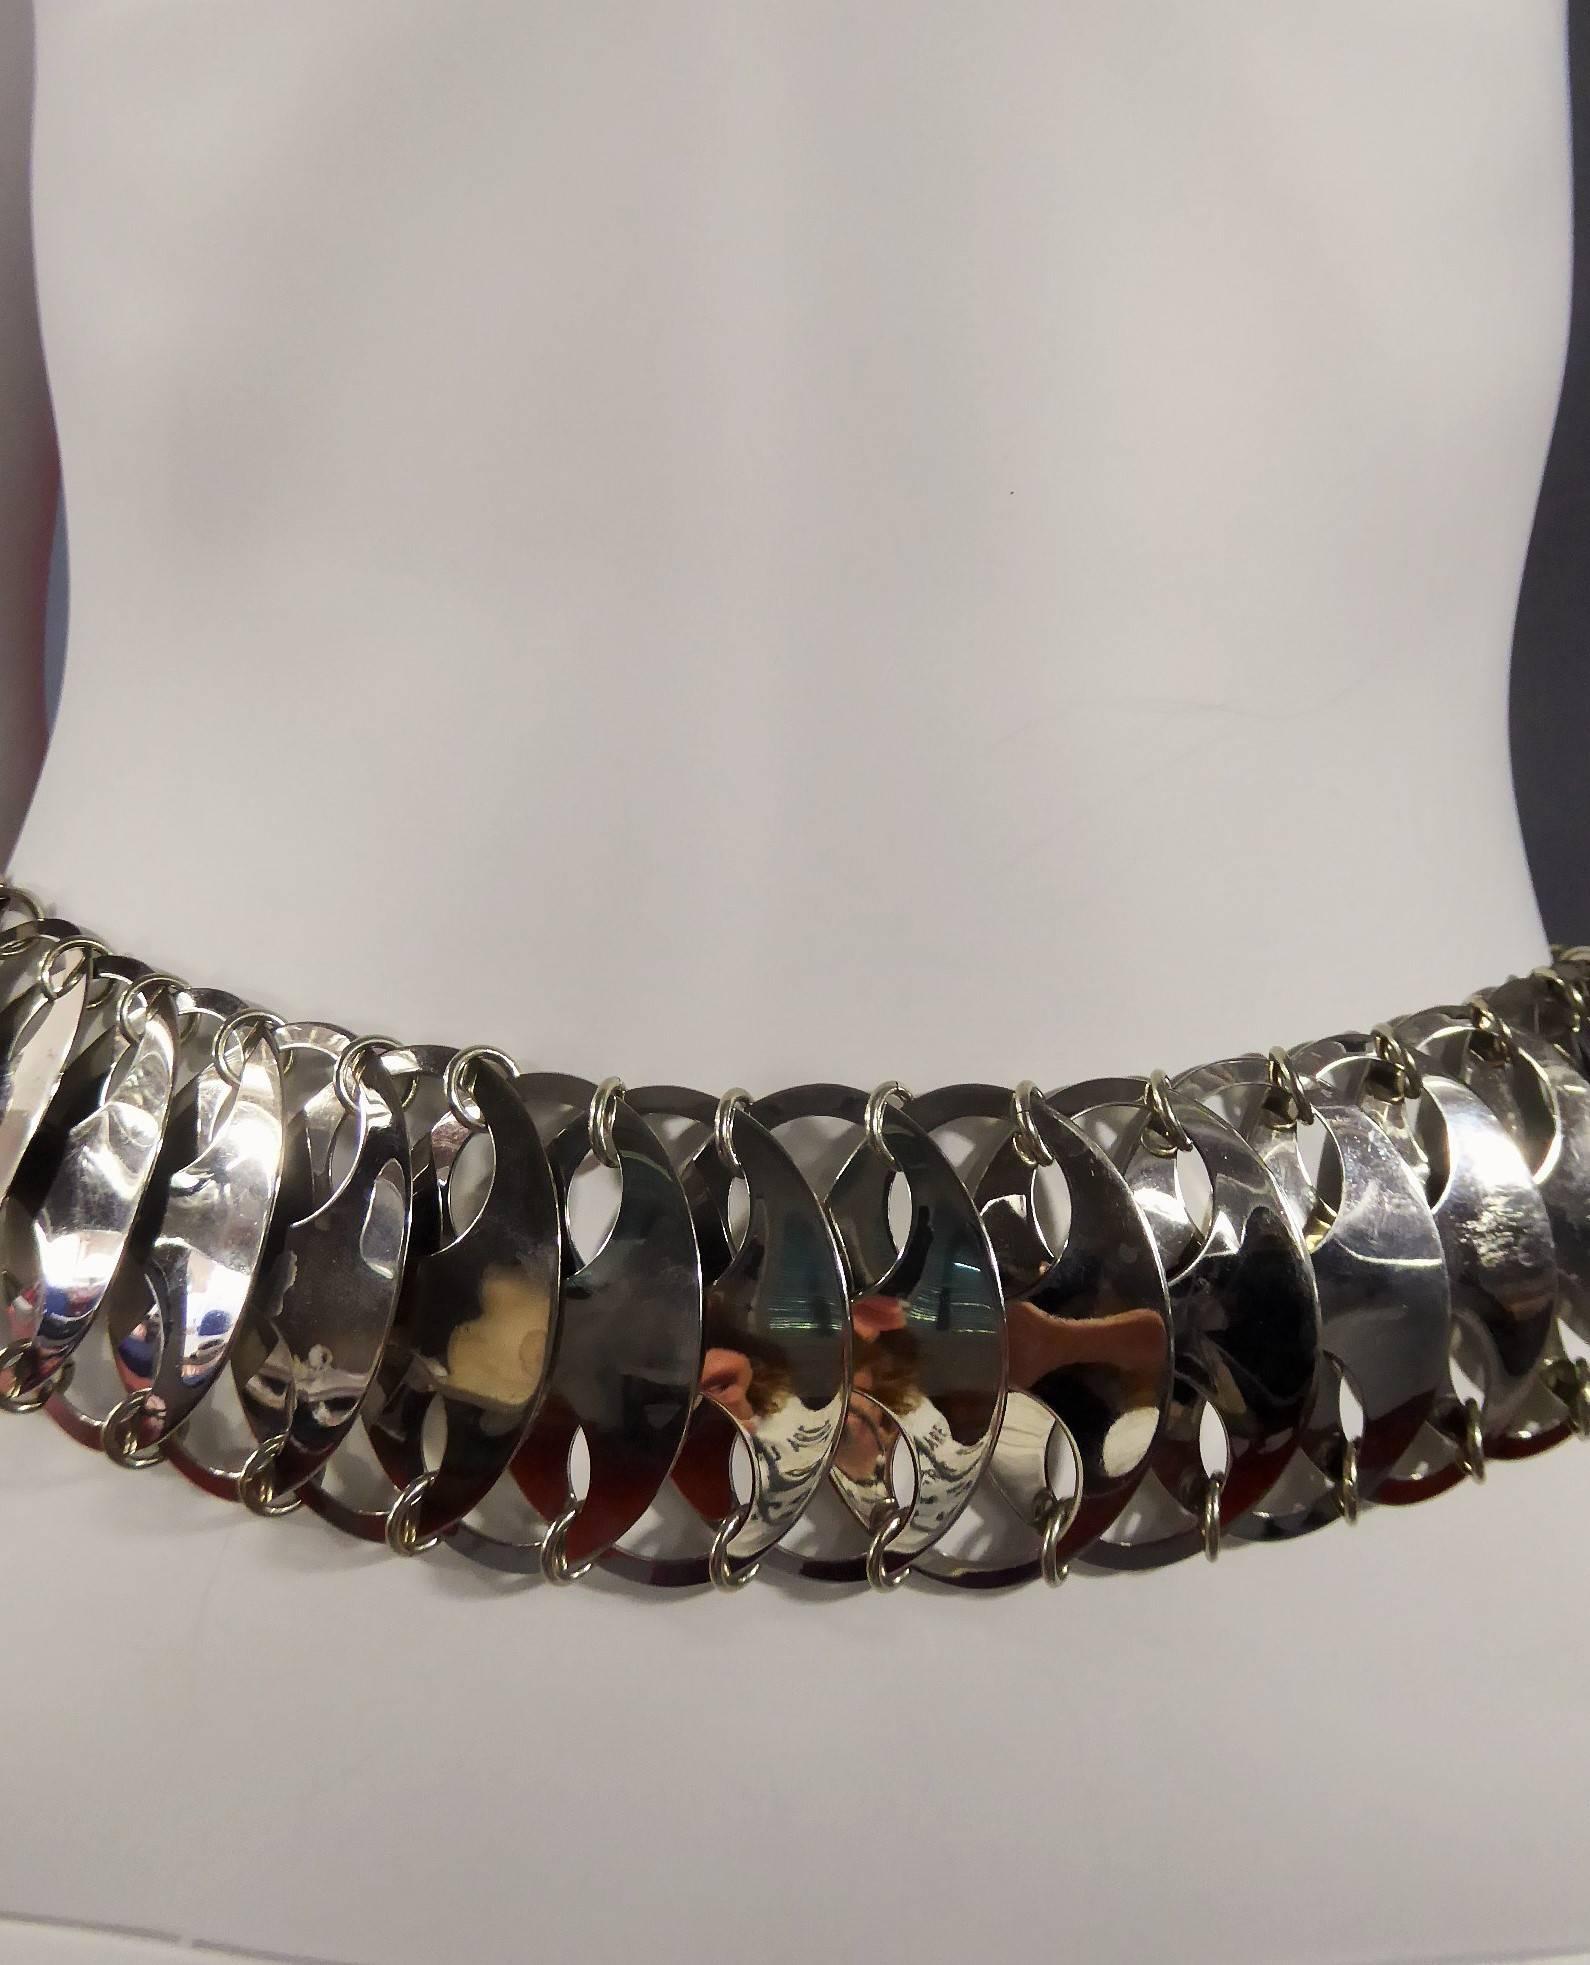 An Early Paco Rabanne Couture Metallic Belt Circa 1970/1980 For Sale 1